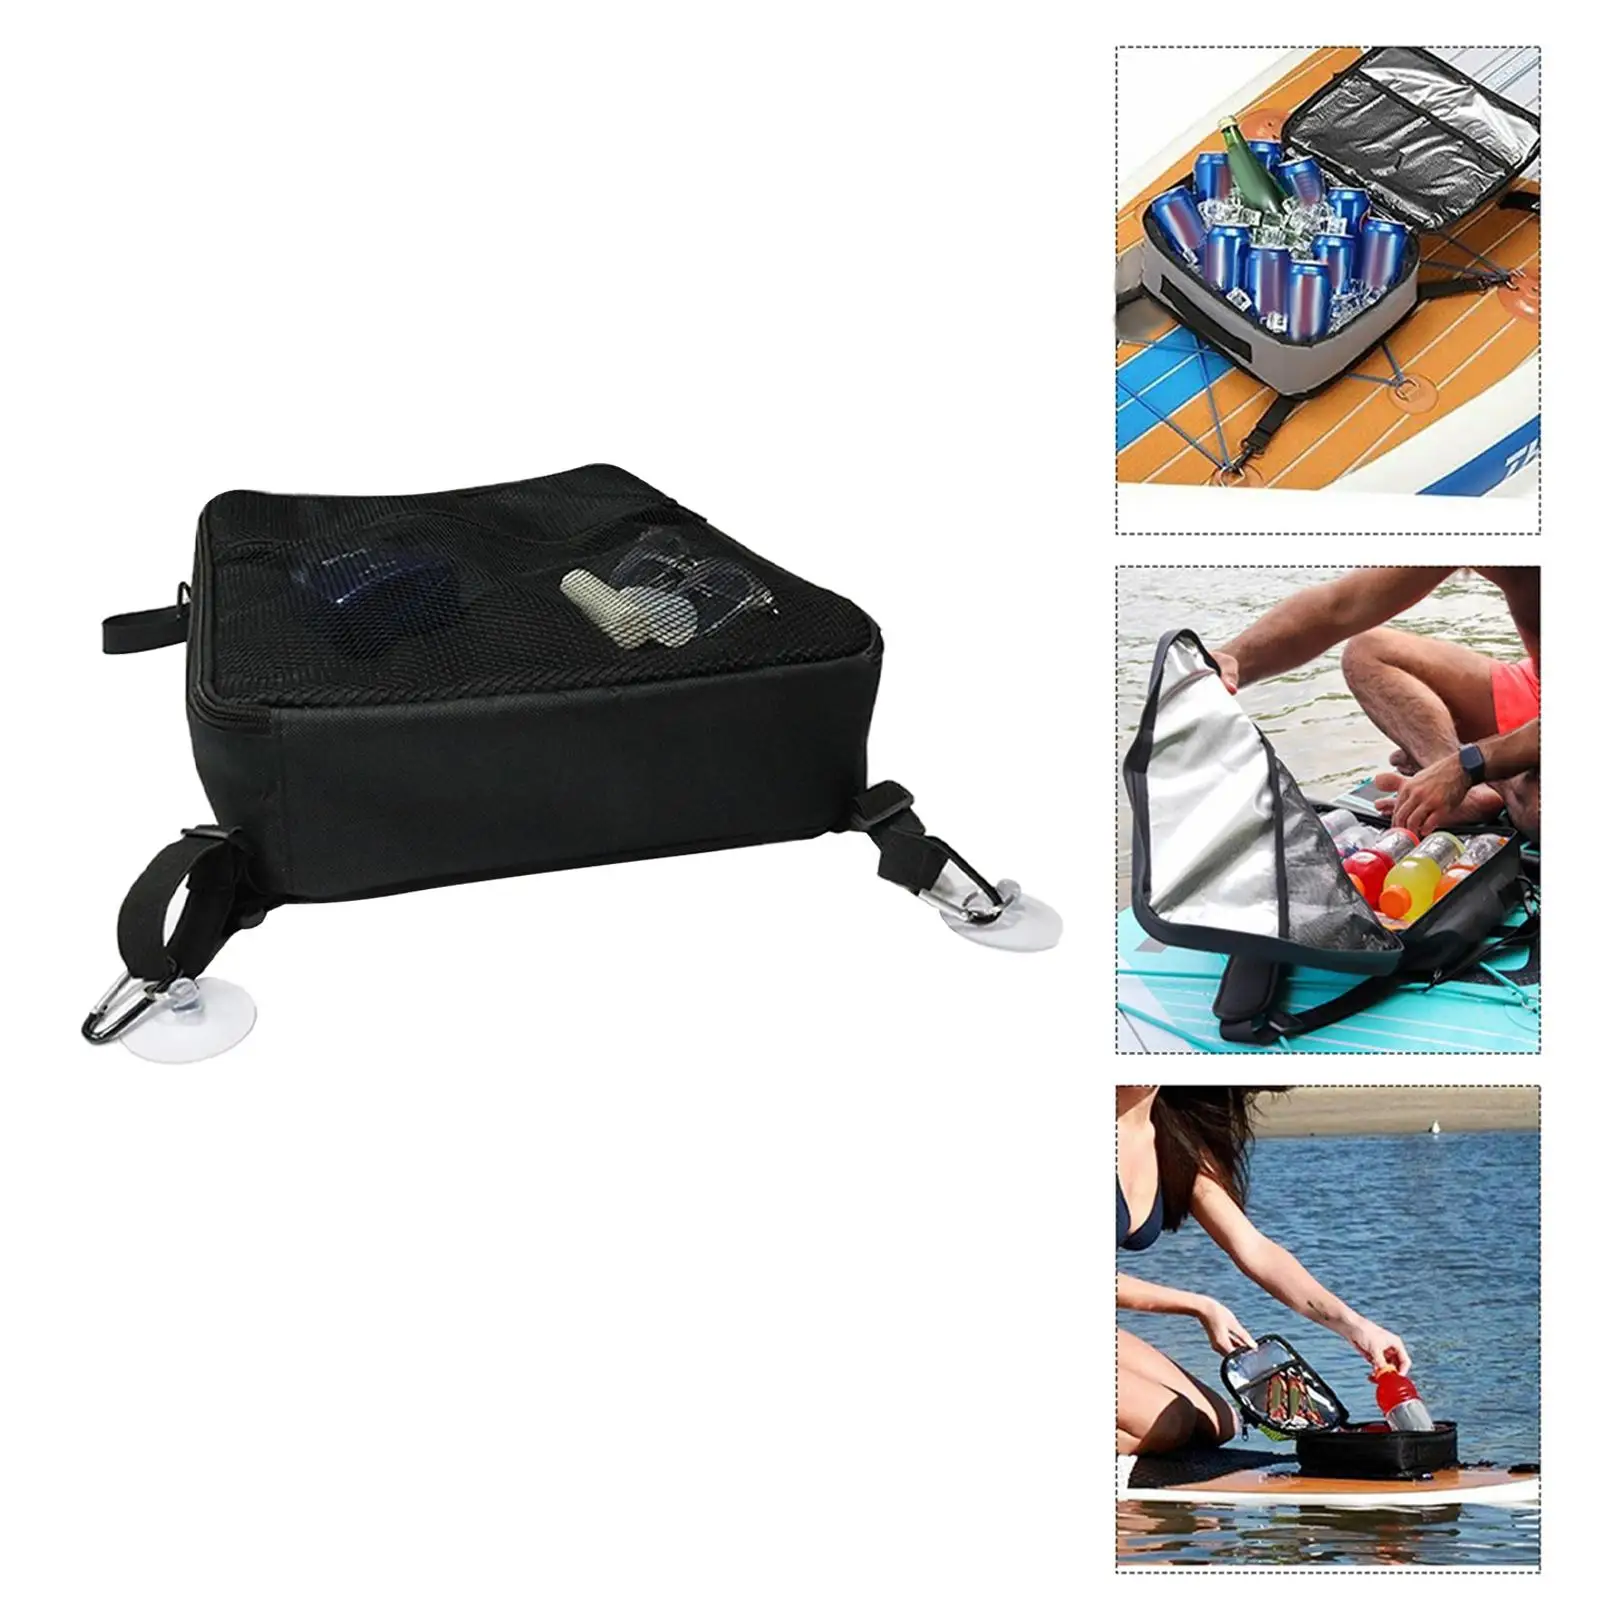 Paddle Board Deck Bag Paddleboard Cooler Mesh Top Pocket, Storage Easy to Install Zipper Accessory Maintain Food and Drink Cold